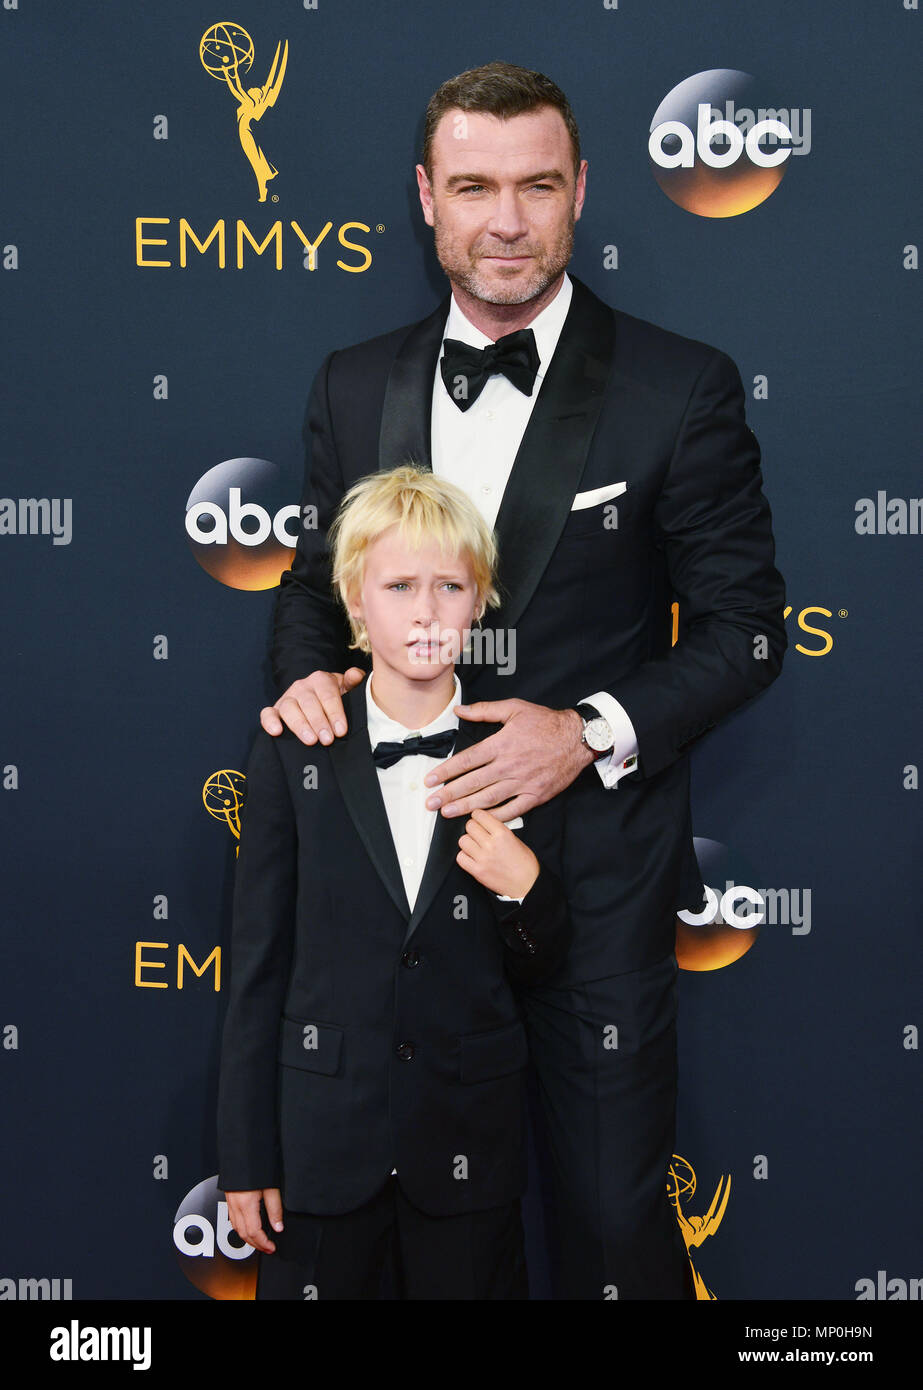 Liev Schreiber, Alexander Schreiber 073 at the 68th Emmy Awards 2016 at the Microsoft Theatre in Los Angeles. September 18, 2016.Liev Schreiber, Alexander Schreiber 073 ------------- Red Carpet Event, Vertical, USA, Film Industry, Celebrities,  Photography, Bestof, Arts Culture and Entertainment, Topix Celebrities fashion /  Vertical, Best of, Event in Hollywood Life - California,  Red Carpet and backstage, USA, Film Industry, Celebrities,  movie celebrities, TV celebrities, Music celebrities, Photography, Bestof, Arts Culture and Entertainment,  Topix, vertical,  family from from the year , 2 Stock Photo